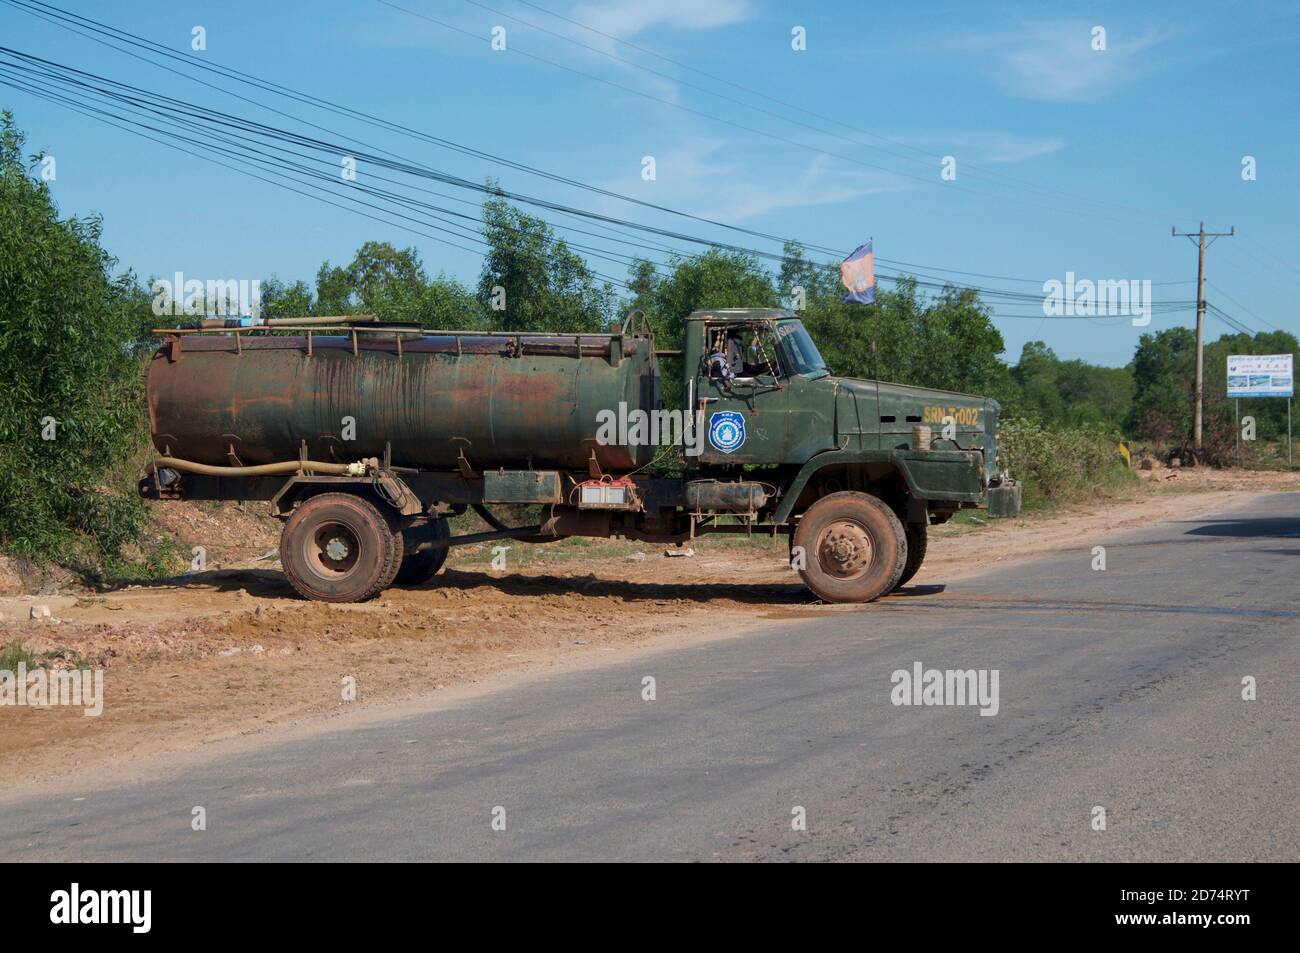 Sihanoukville, Cambodia - 30th December 2018 : View of a typical old and rusty fuel truck maneuvering on a street in Sihanoukville, Cambodia Stock Photo